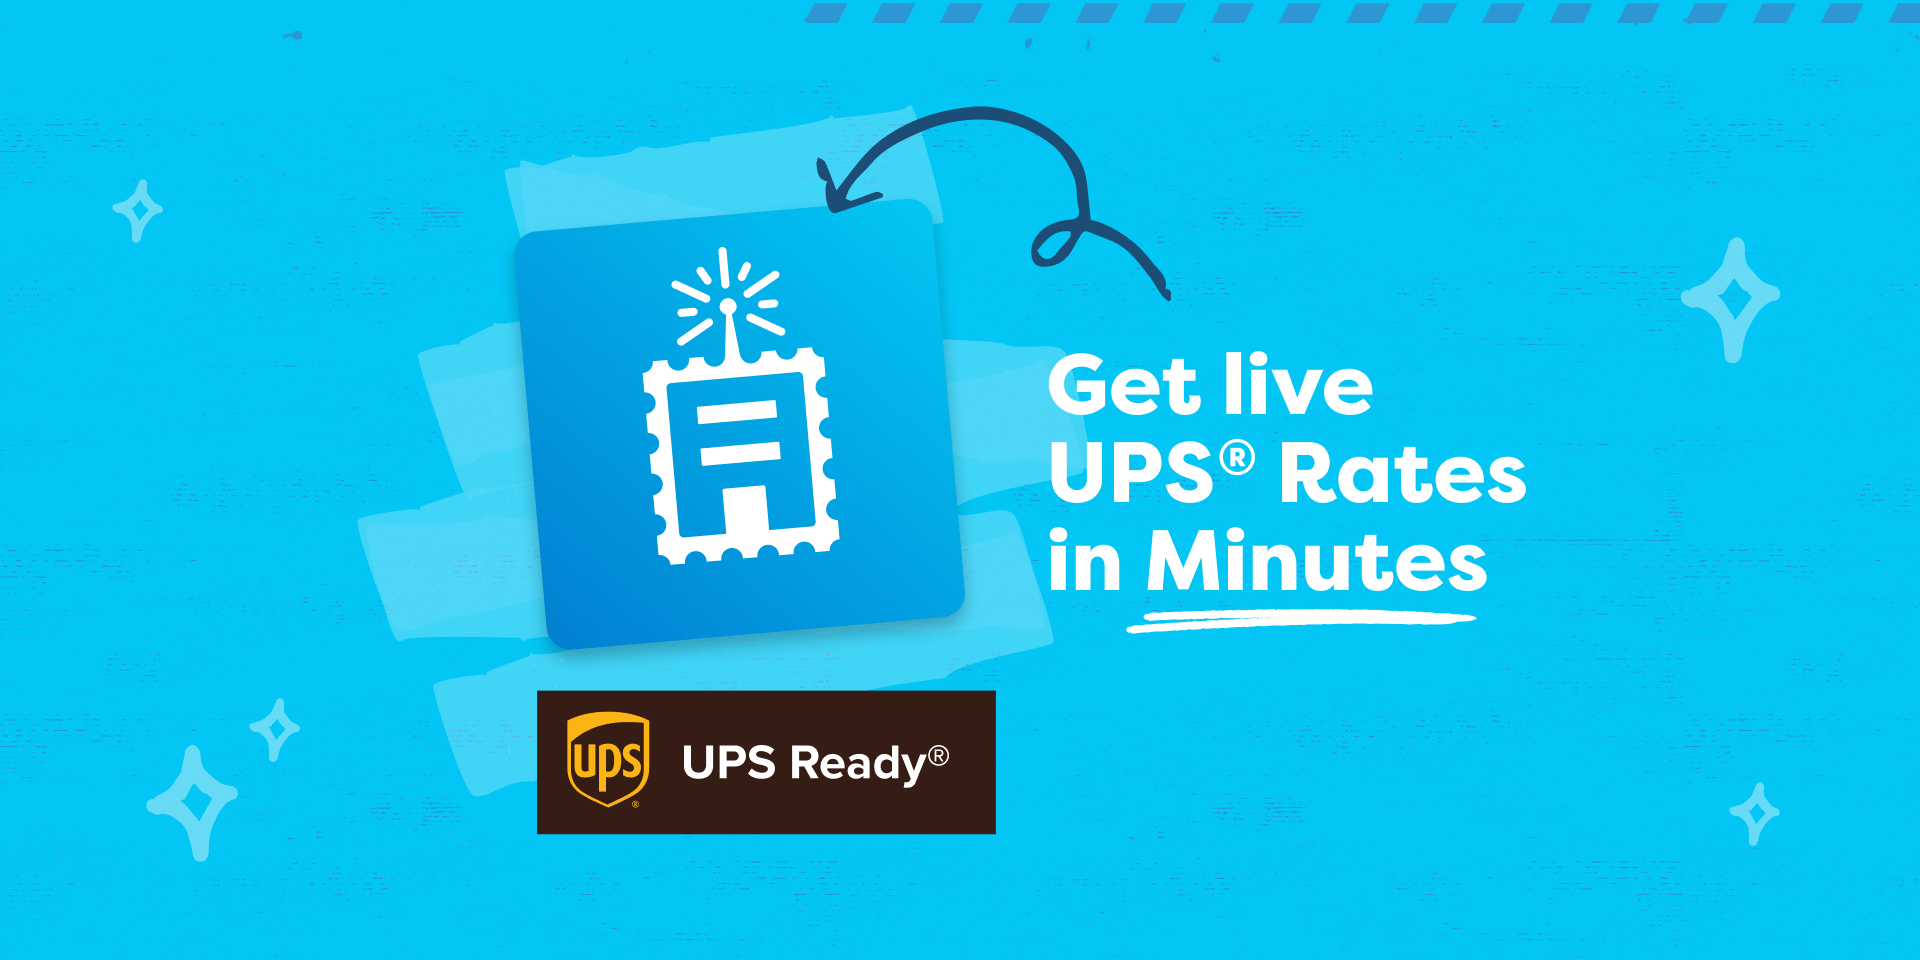 Free Offer for UPS Customers on WooCommerce